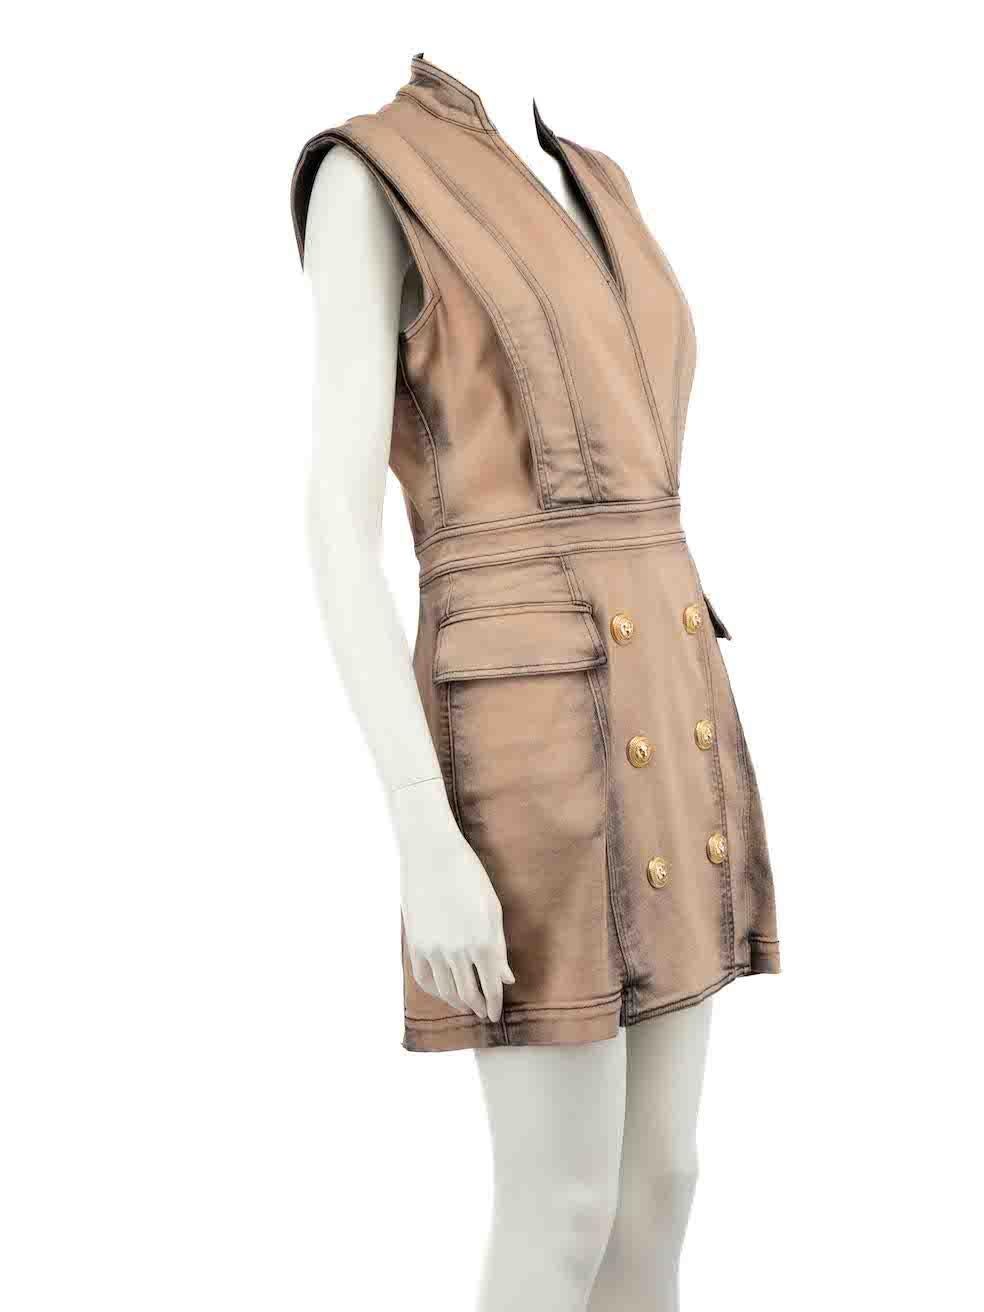 CONDITION is Very good. Hardly any visible wear to dress is evident on this used Balmain designer resale item.
 
Details
Pink
Stone washed denim
Dress
Gold snap button detail
Sleeveless
V-neck
Mini
Back zip fastening
2x Side pockets
 
Made in Italy
